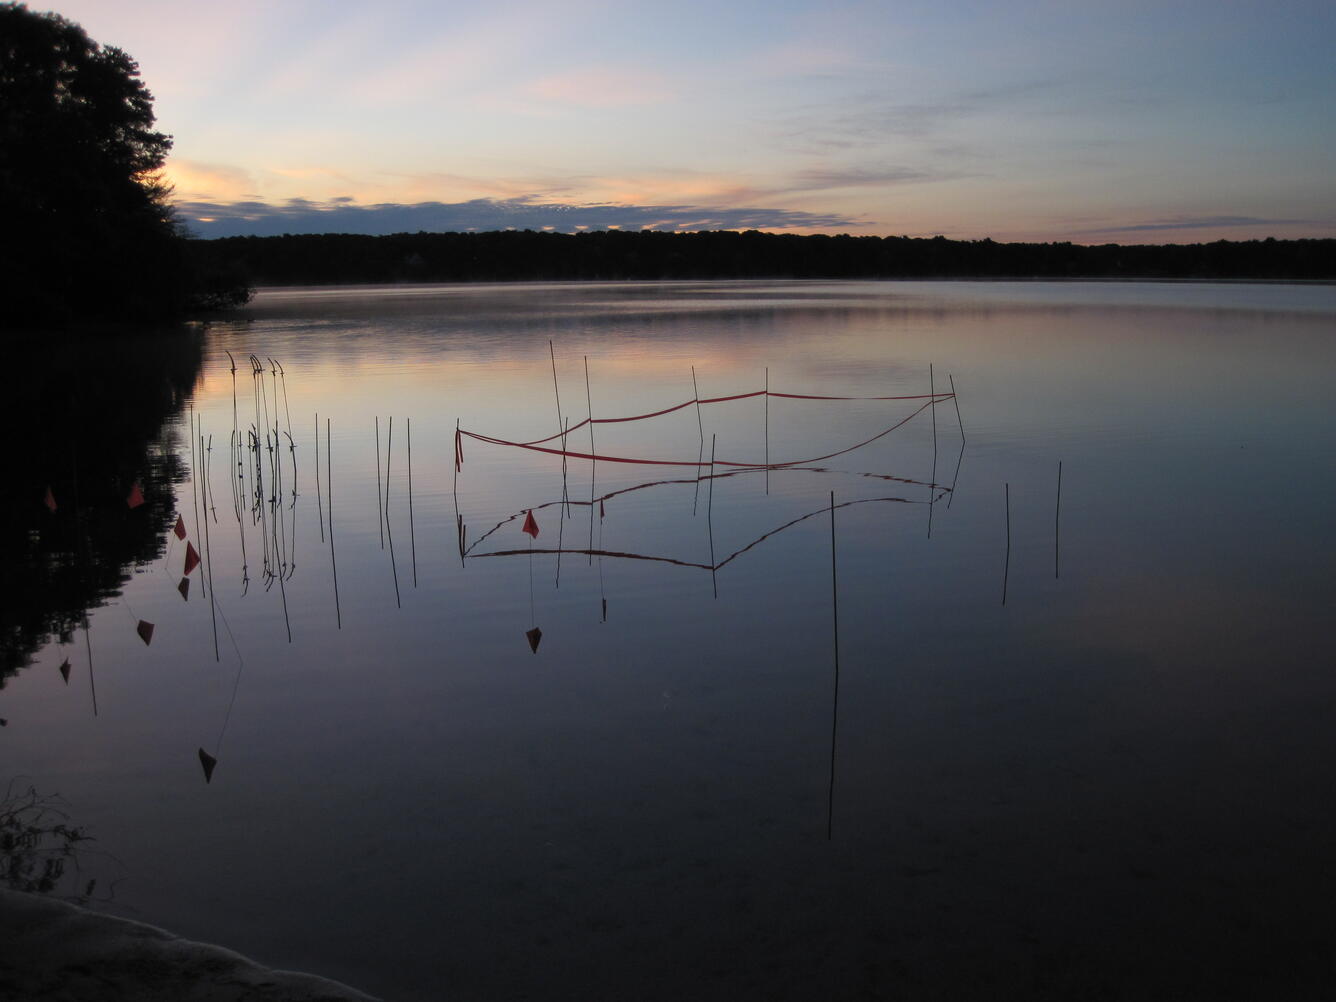 view across Ashumet Pond, Cape Cod, Massachusetts, with sampling grid markers in forground